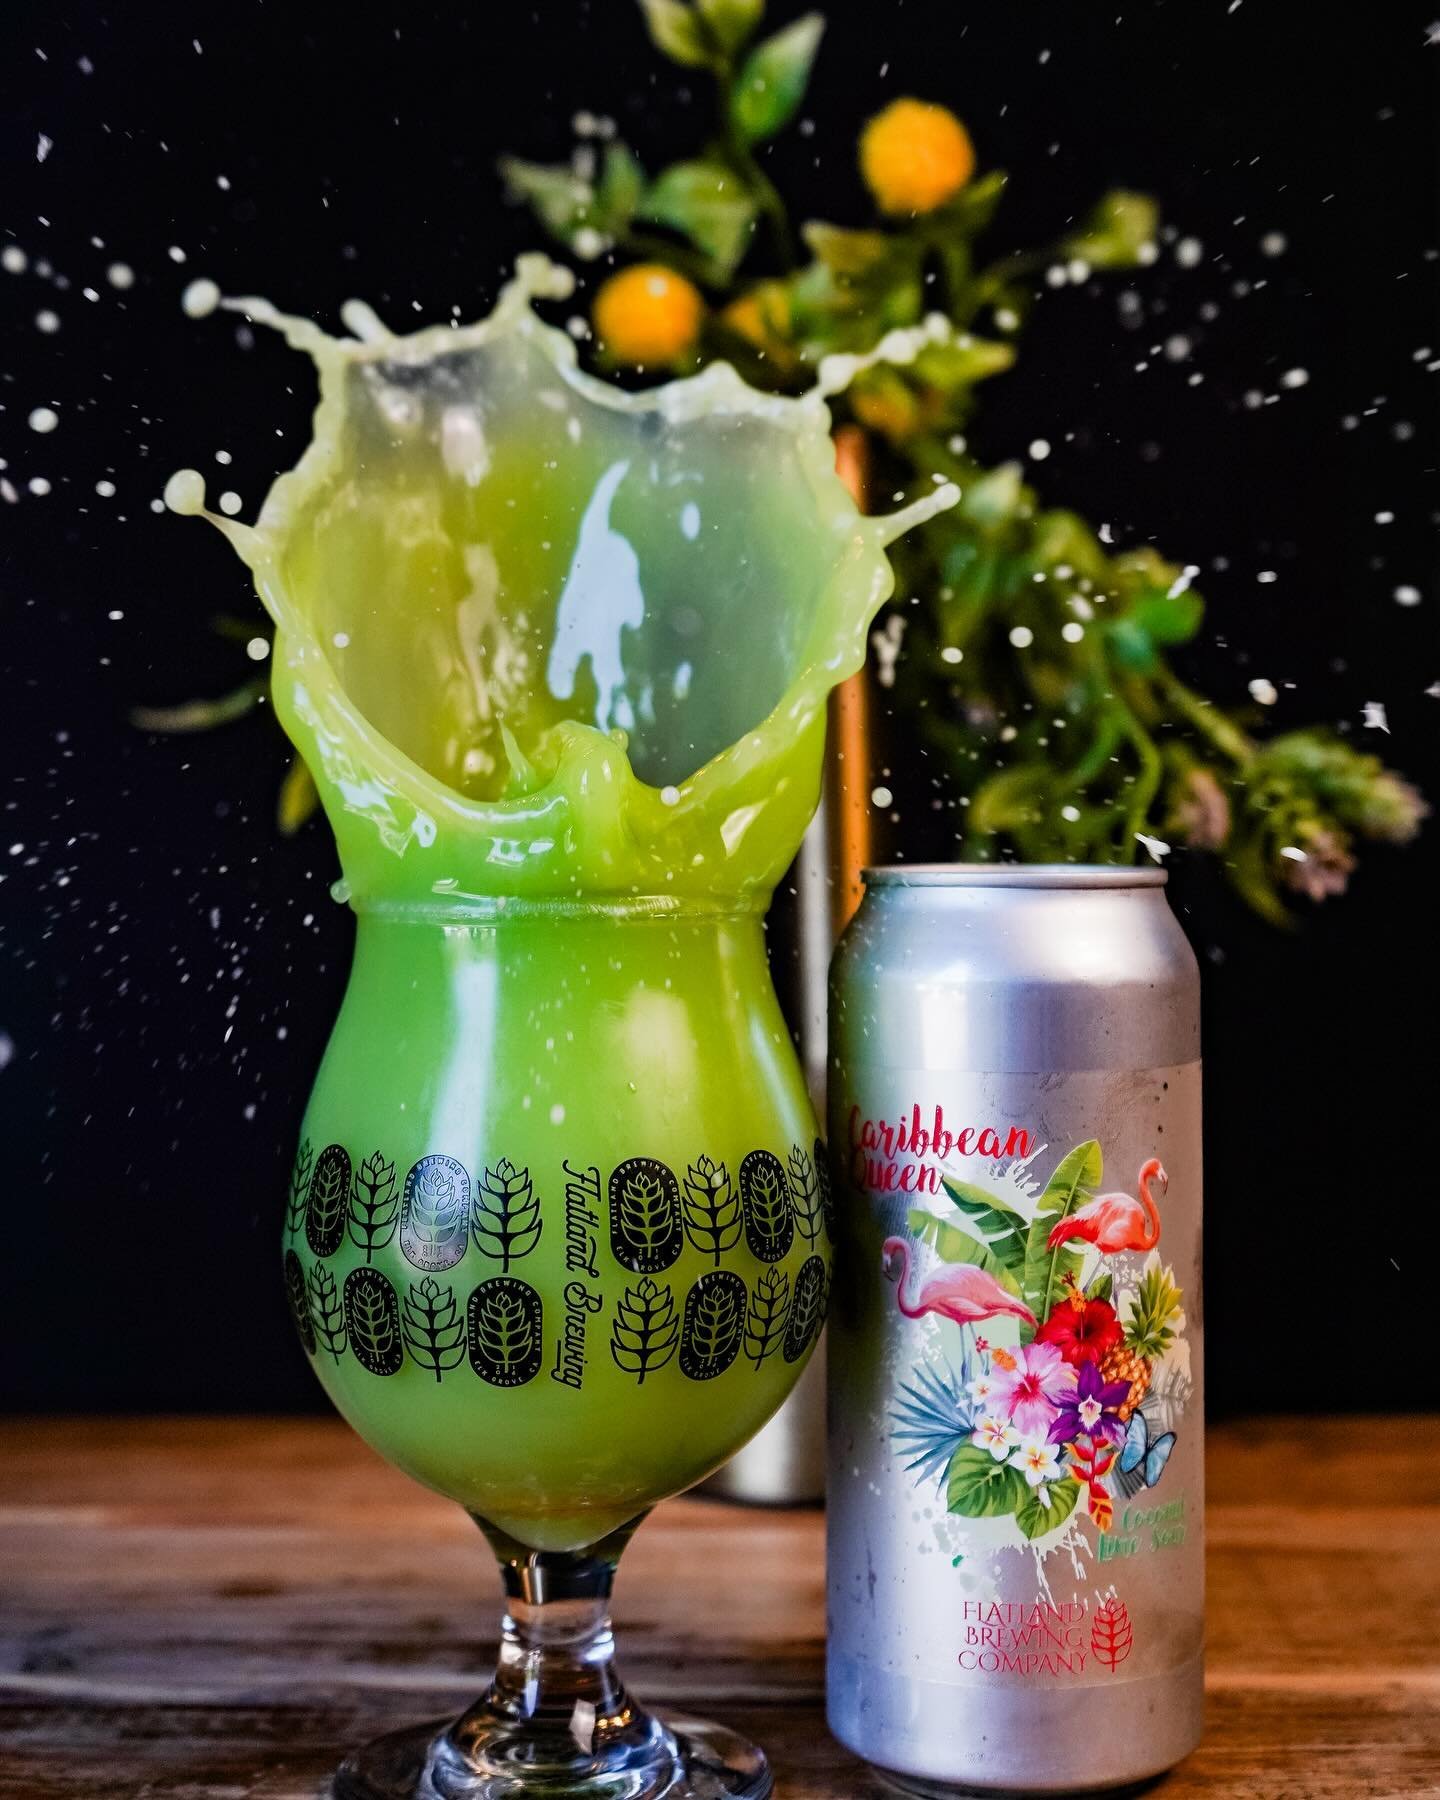 🎶Caribbean Queen
Now we&rsquo;re sharing the same dream And our hearts they beat as one
No more love on the run🎶

Introducing &ldquo;Caribbean Queen&rdquo; - Fruited Sour (5.5%) w/ Coconut &amp; Lime.

👉 Catch cans at the taproom now!